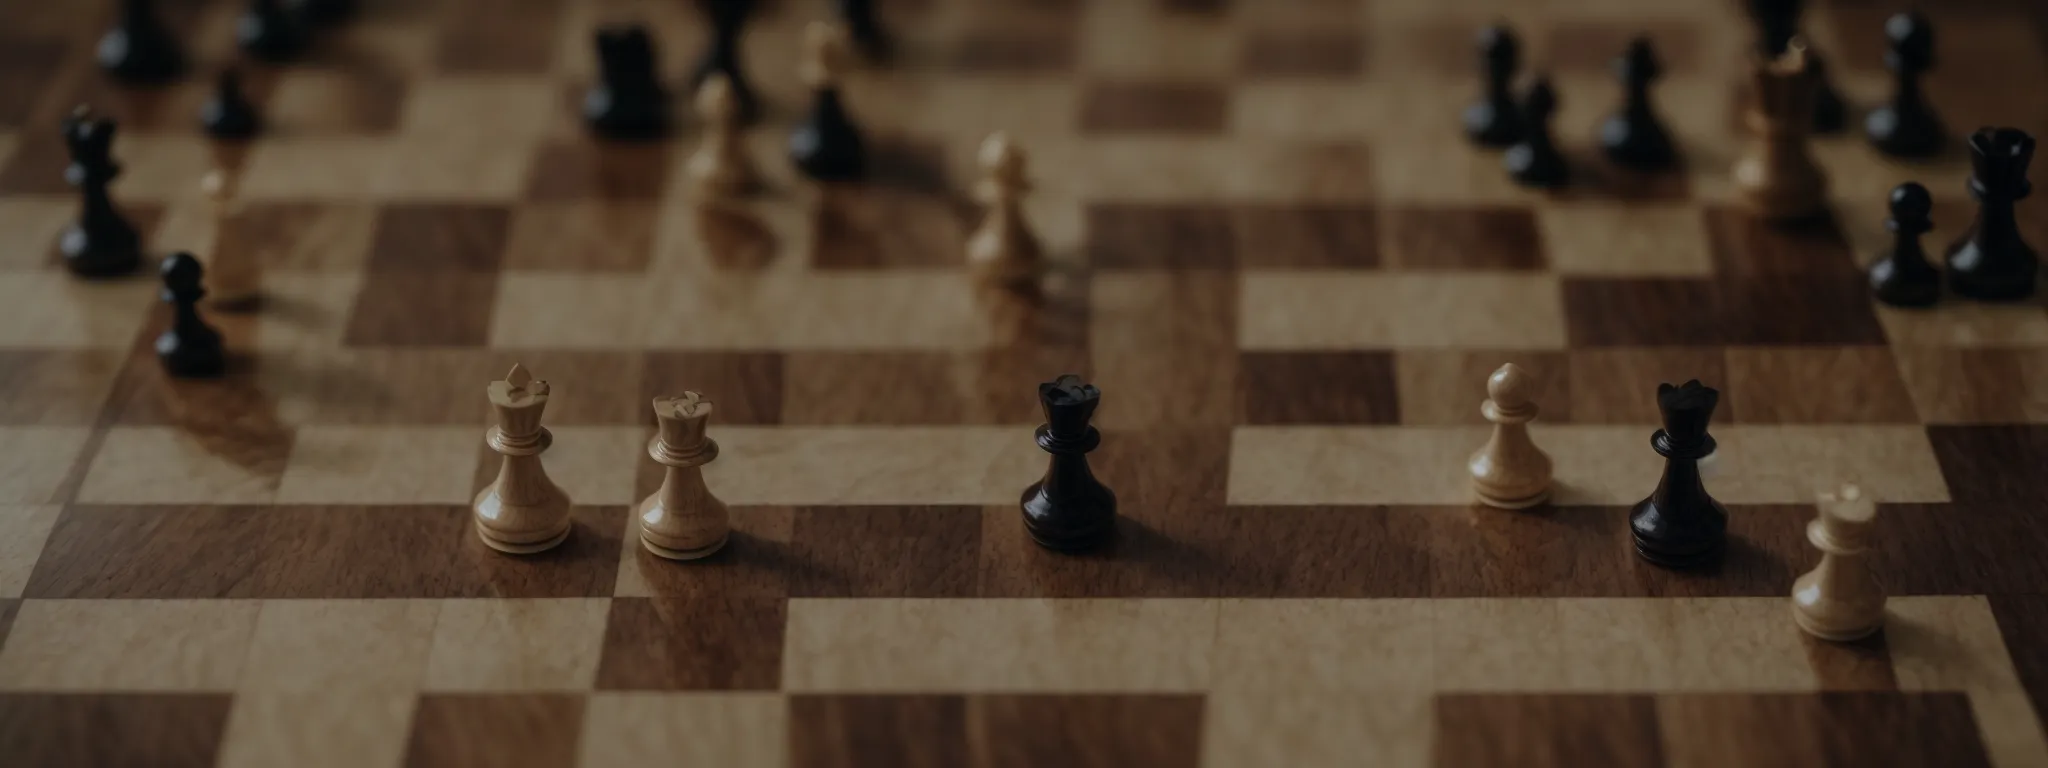 a chessboard from above, mid-game, reflecting strategic moves and planning.